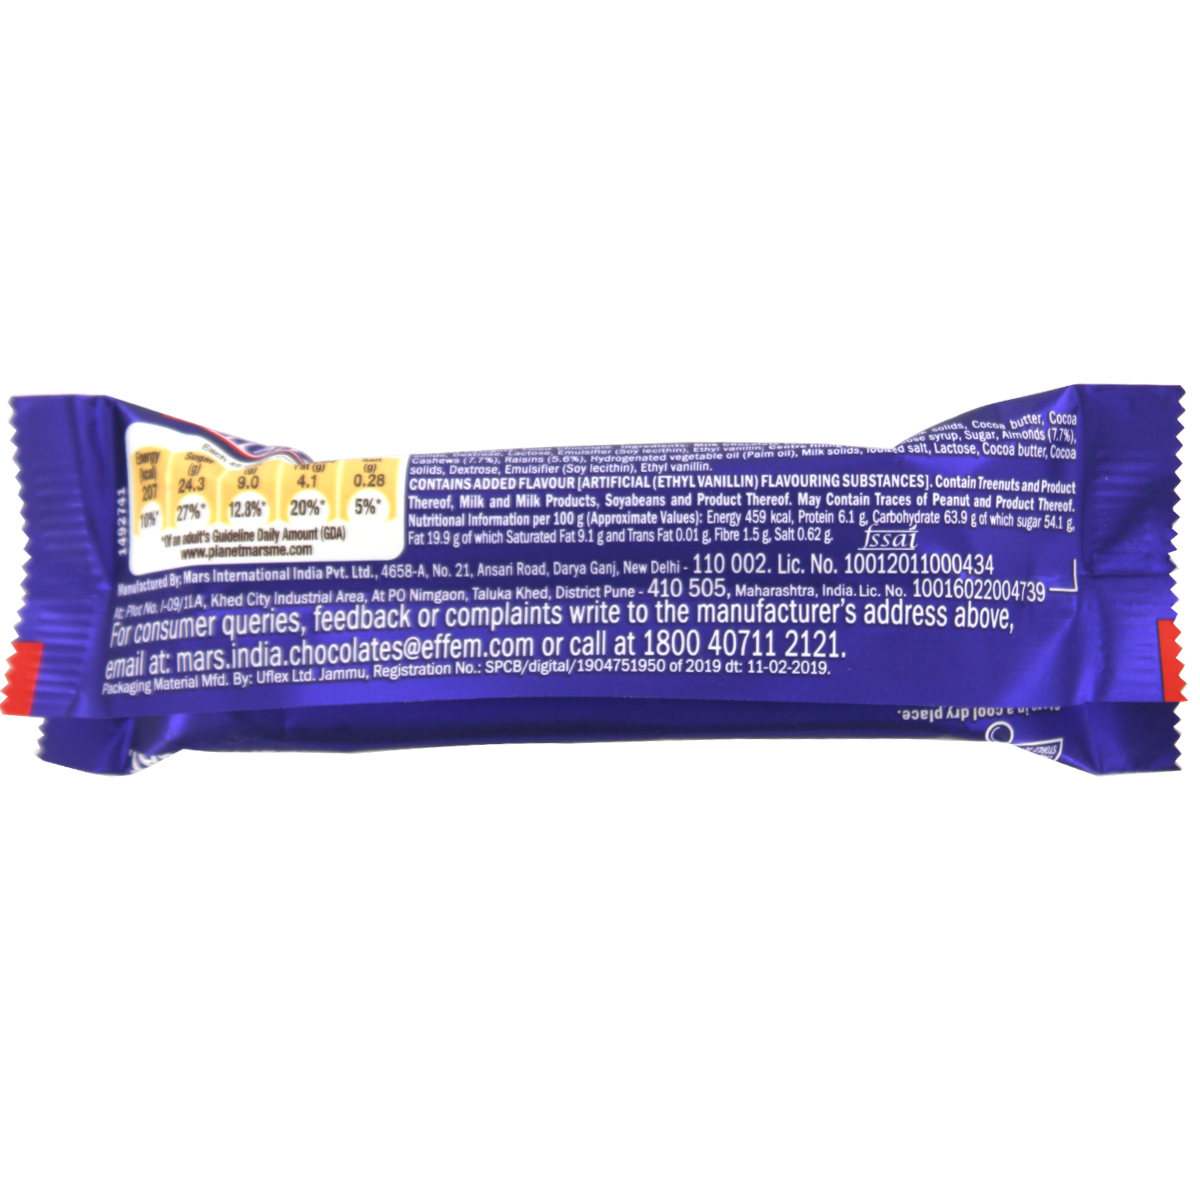 Snickers Fruit & Nut Bar 45gm